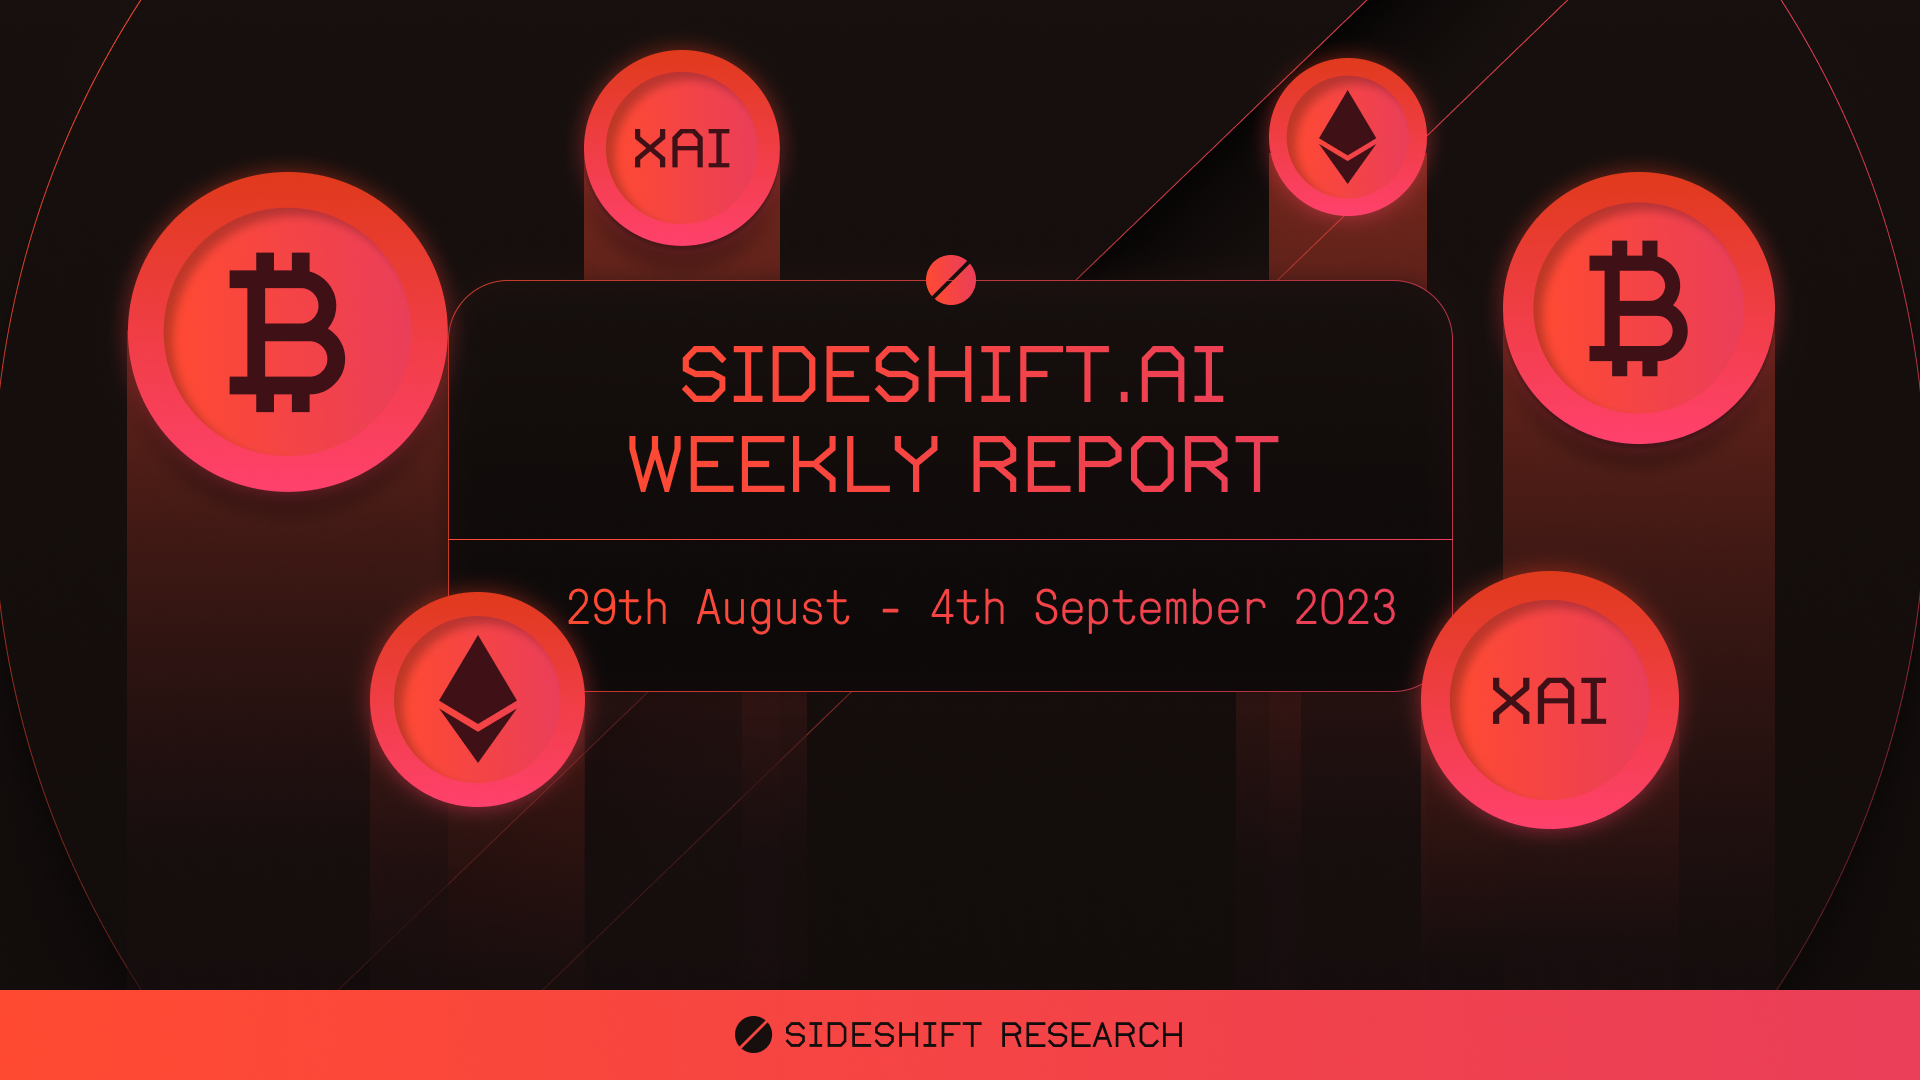 SideShift.ai Weekly Report | 29th August - 4th September 2023